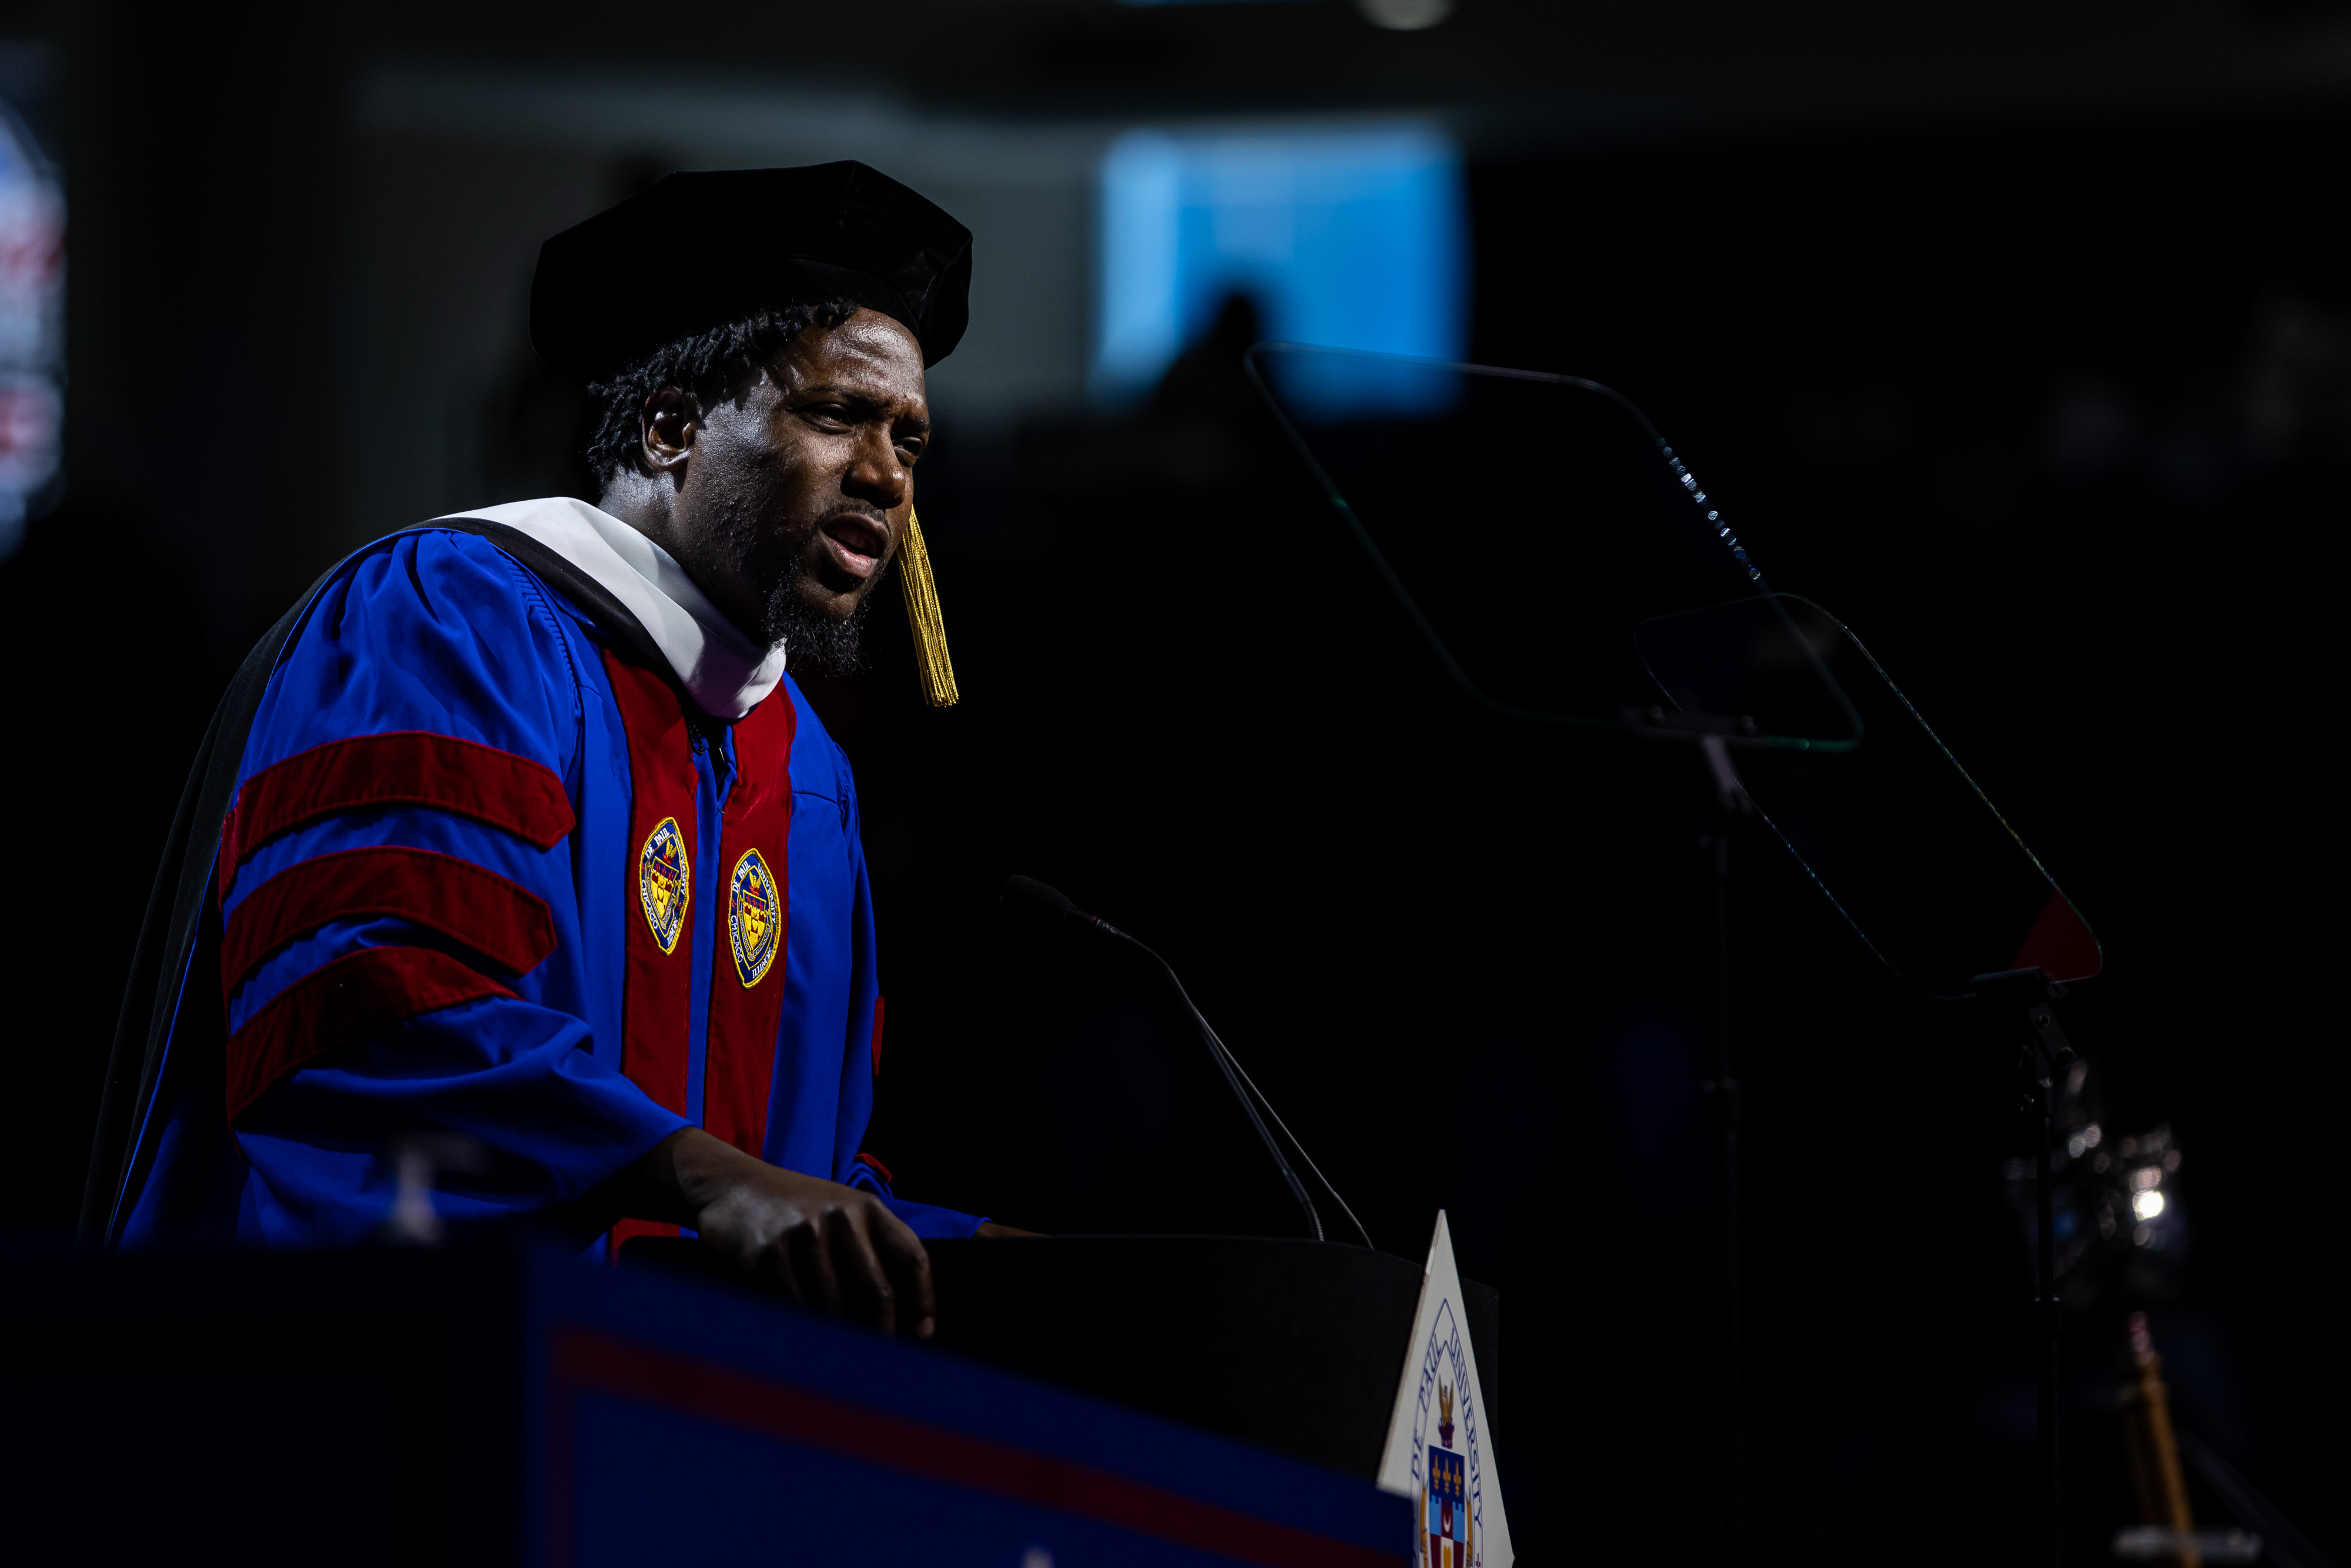 DePaul celebrates 124th Commencement Weekend